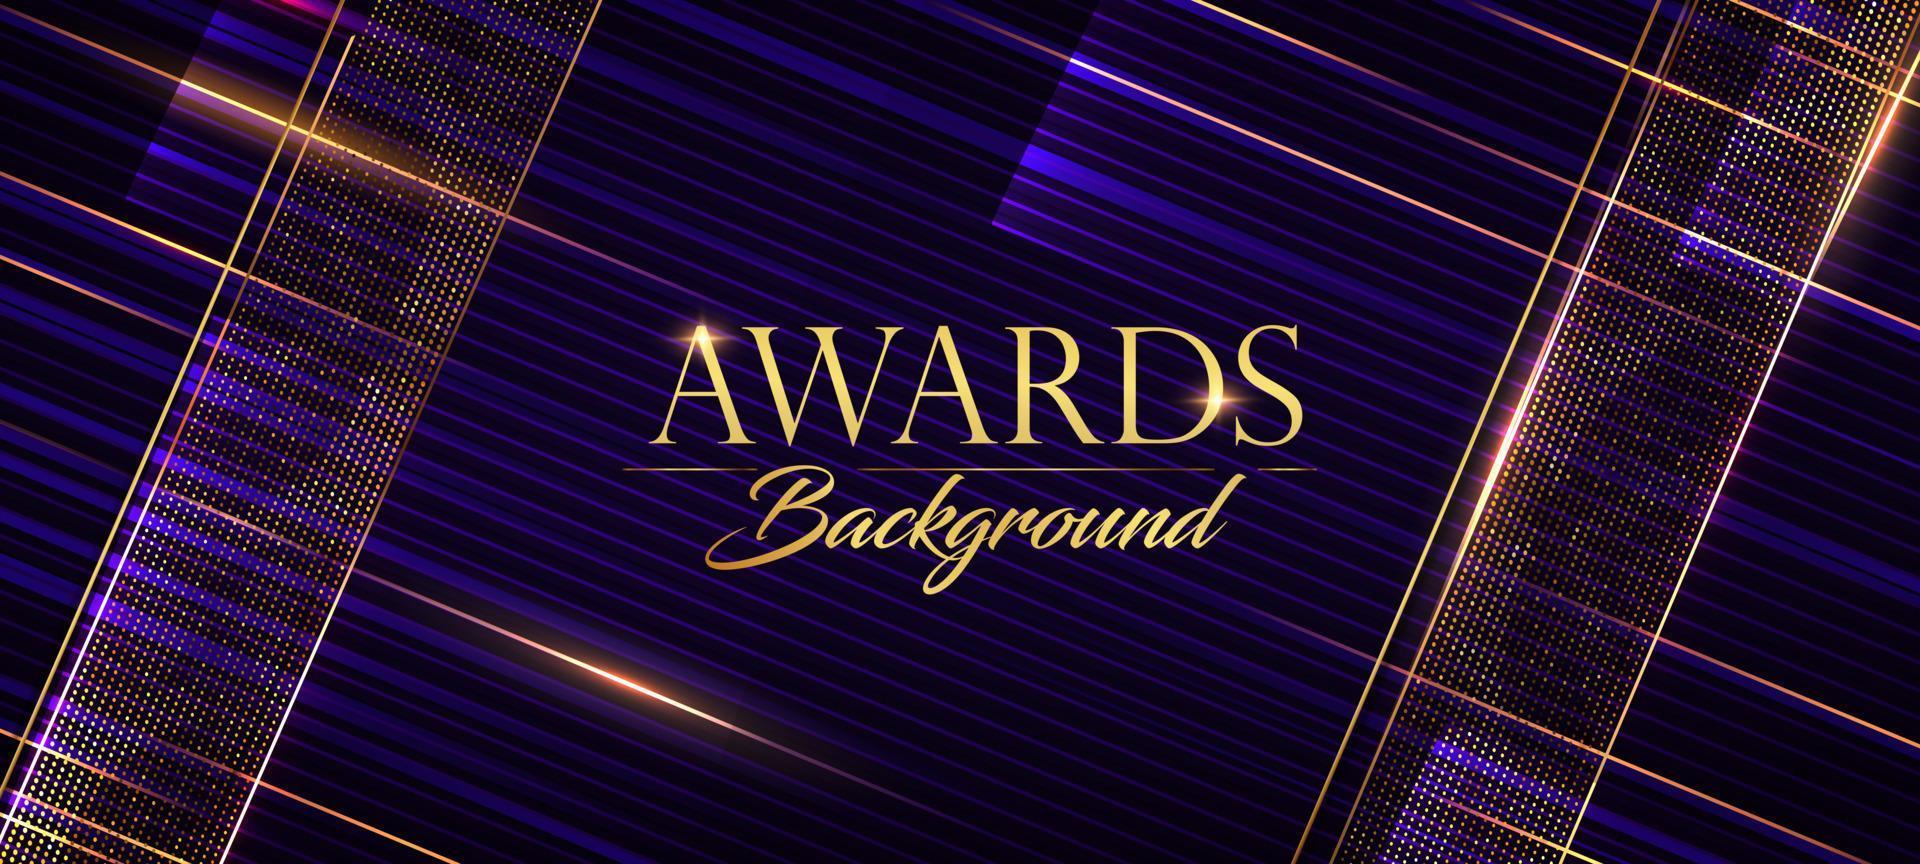 Blue Purple Golden Stage Award Background. Slant Golden Lines Trophy on Luxury Background. Modern Abstract Design Template. LED Visual Motion Graphics. Wedding Marriage Invitation Poster. vector